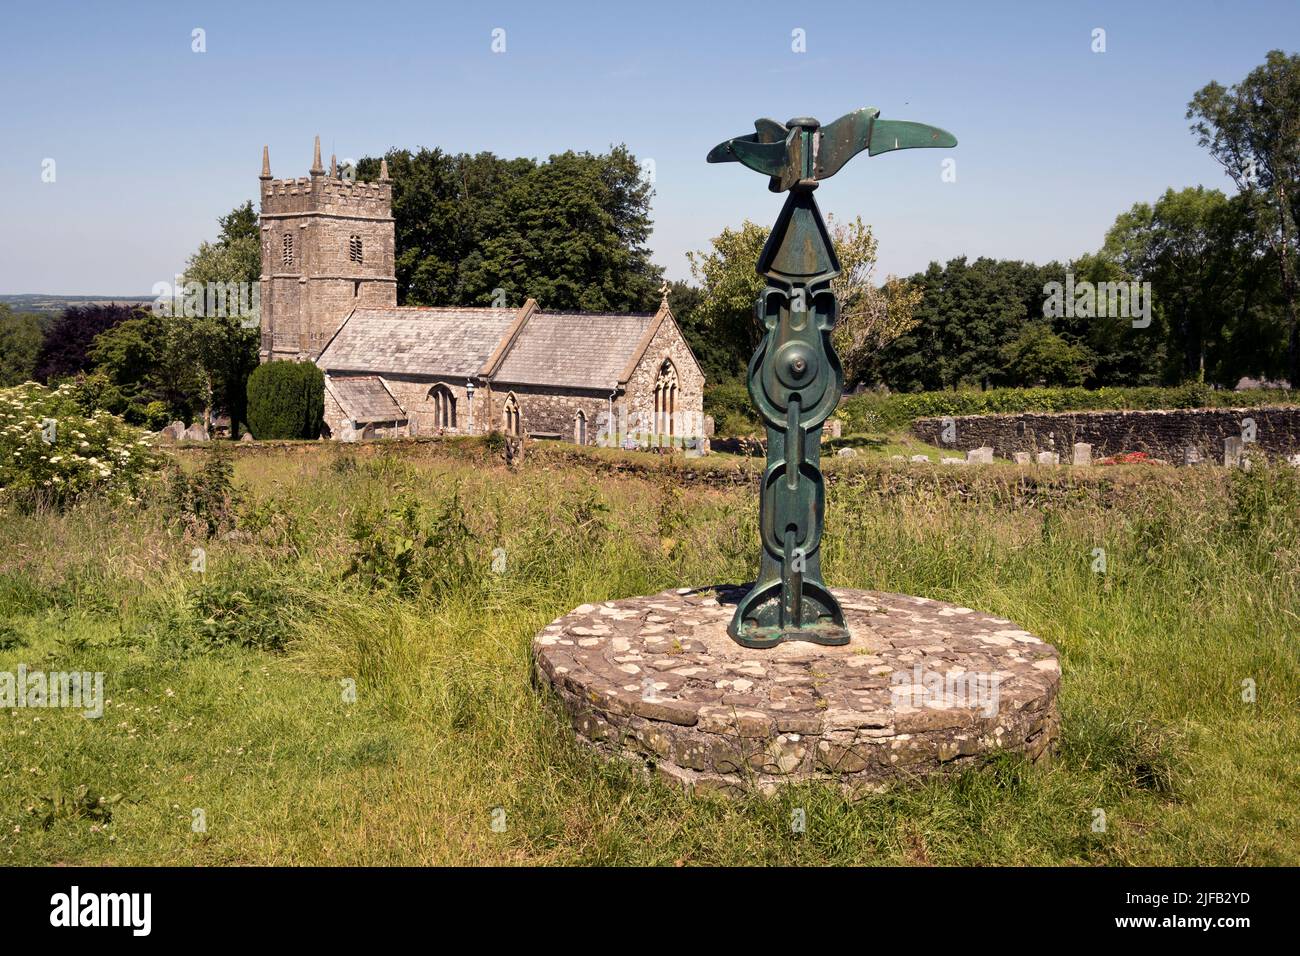 The Granite Way long distance cycle trail, seen at Sourton, Devon, UK. Part of the SUSTRANS national cycle network. To rear St Thomas à Becket church. Stock Photo